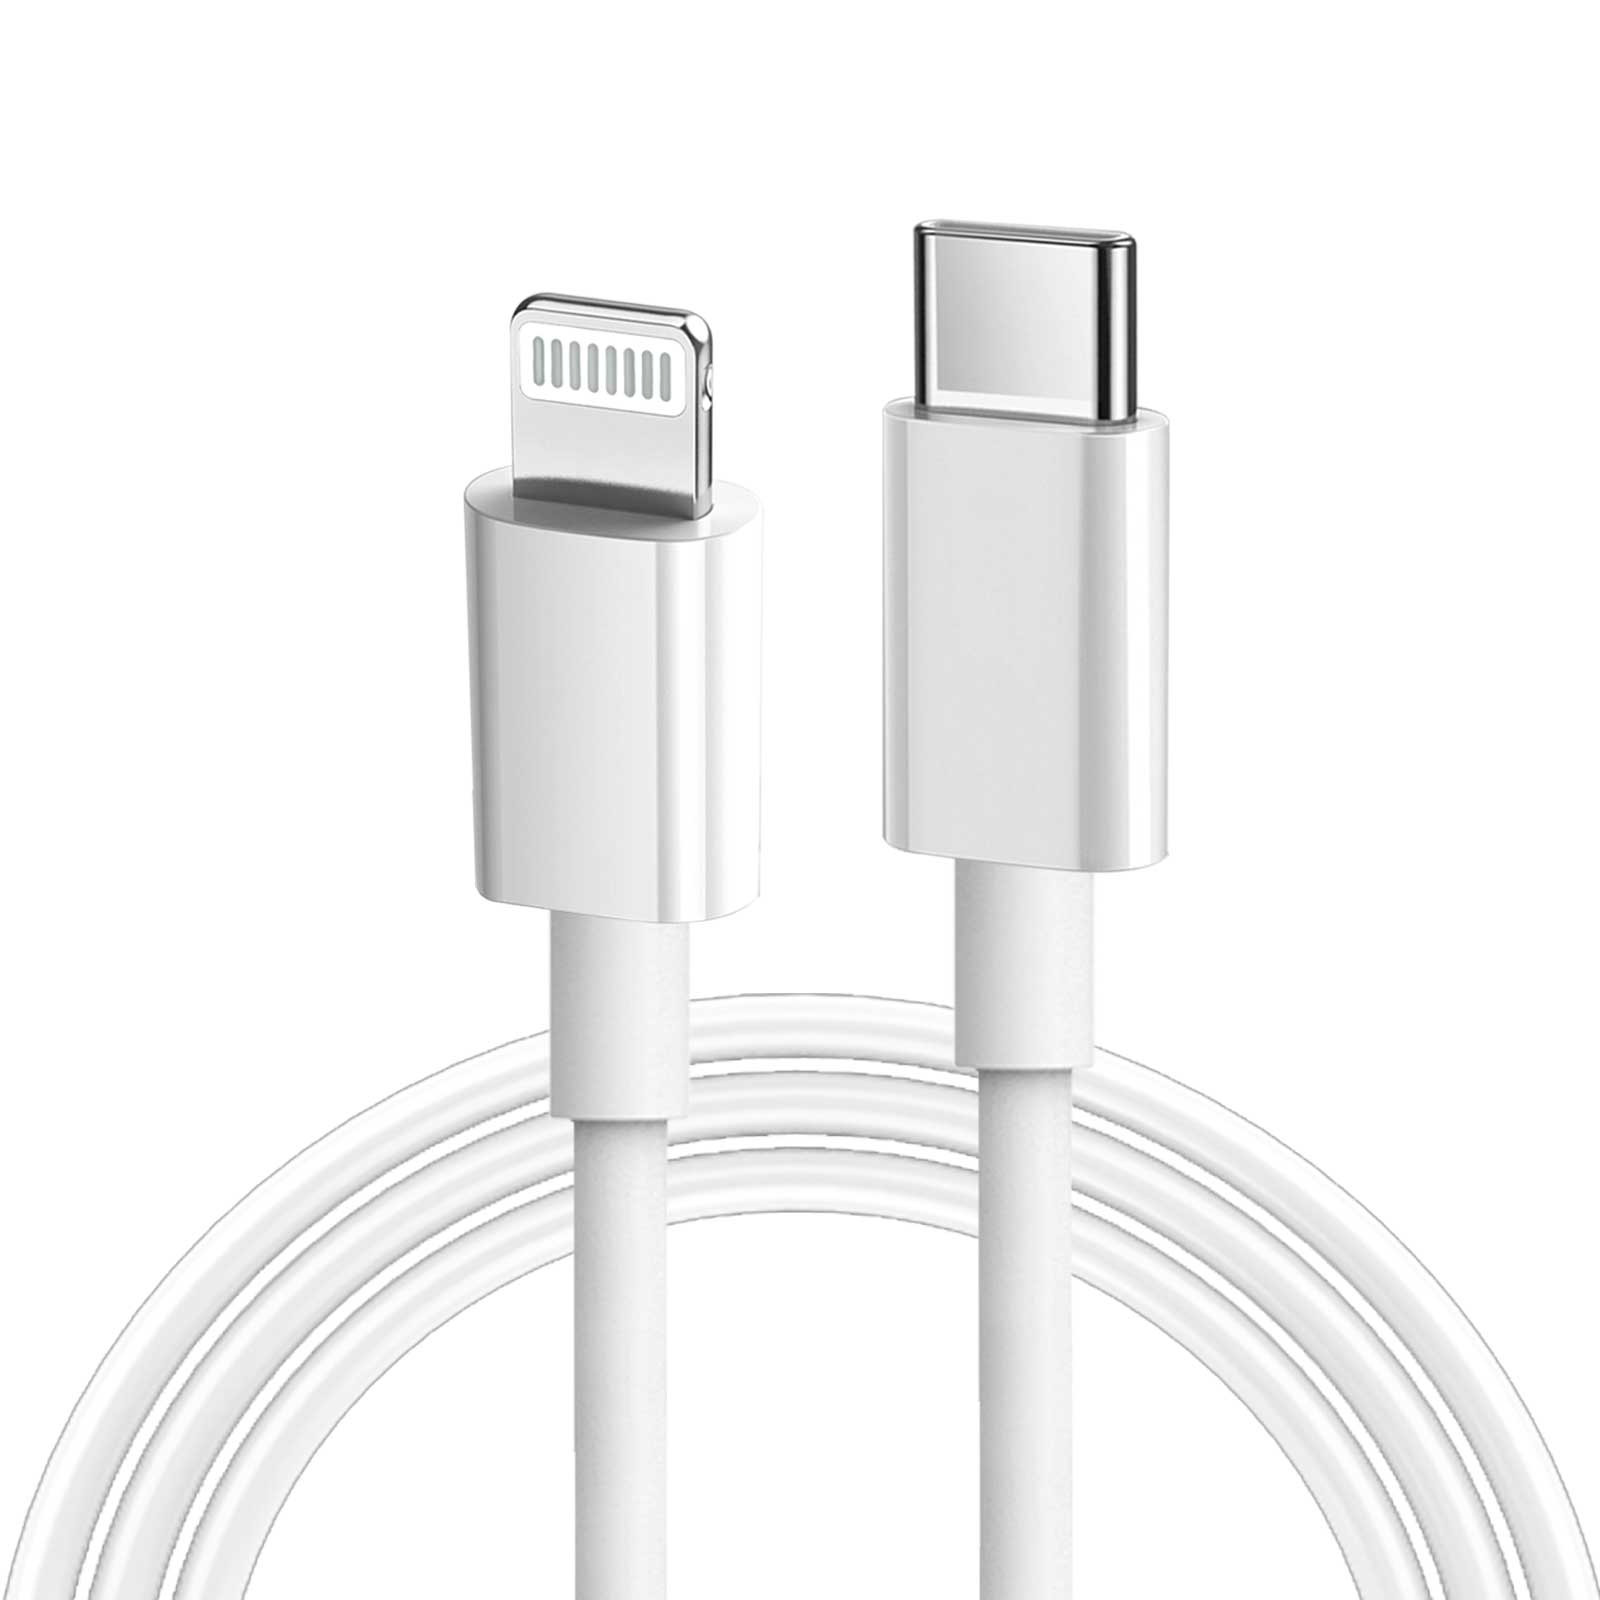 KAL015 C94 Lightning Charger USB C aan Lightning Data Cable PD Fast Charger Compatability met IPhone X